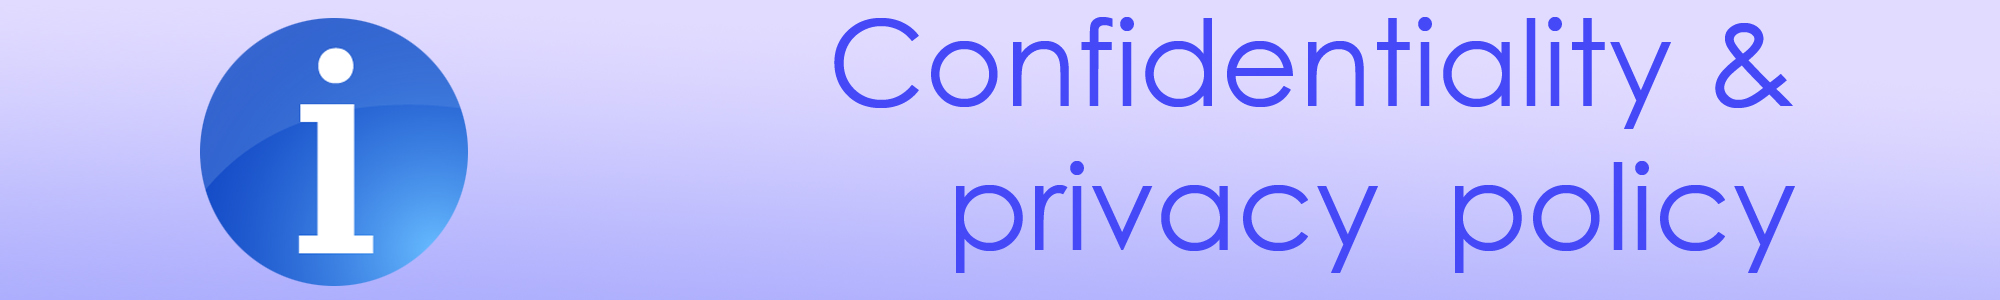 Banner with the caption Confidentiality and privacy policy and a small inset information icon